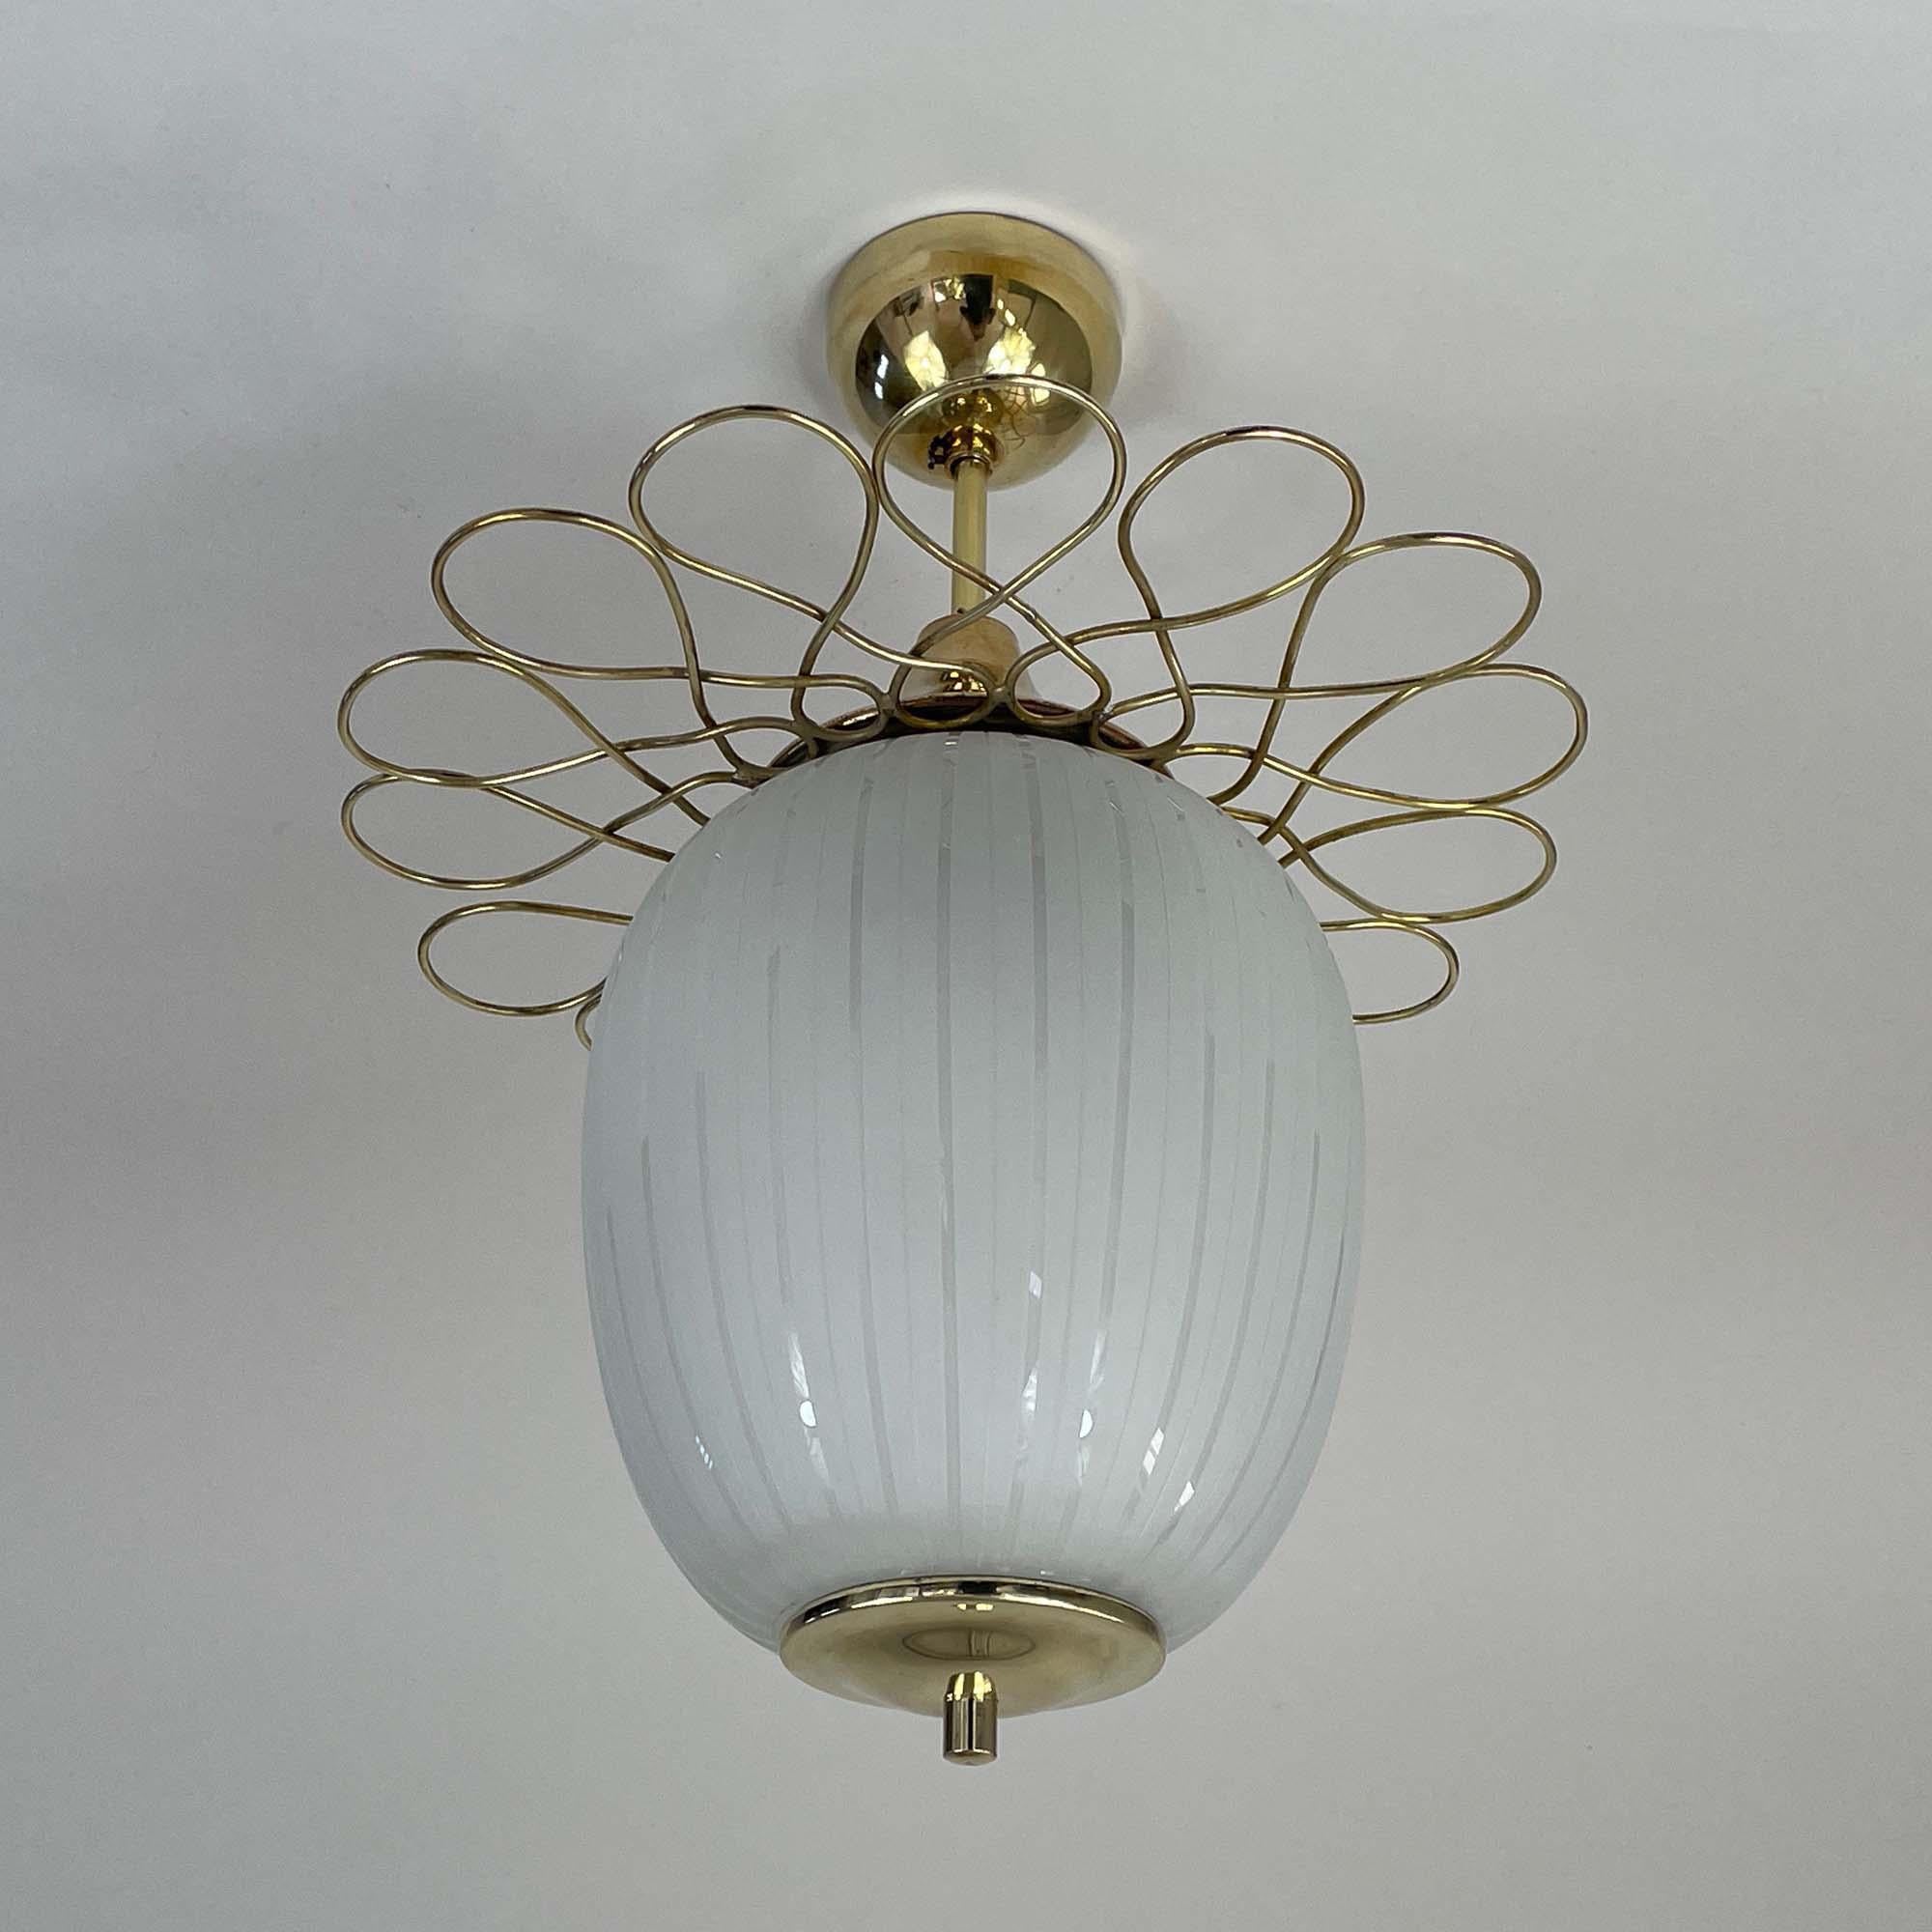 This elegant semi flush mount was designed and manufactured in Finland in the late 1940s. It features a striped and partly satinated opaline glass oval lamp shade and brass hardware.

Total height is 17.3